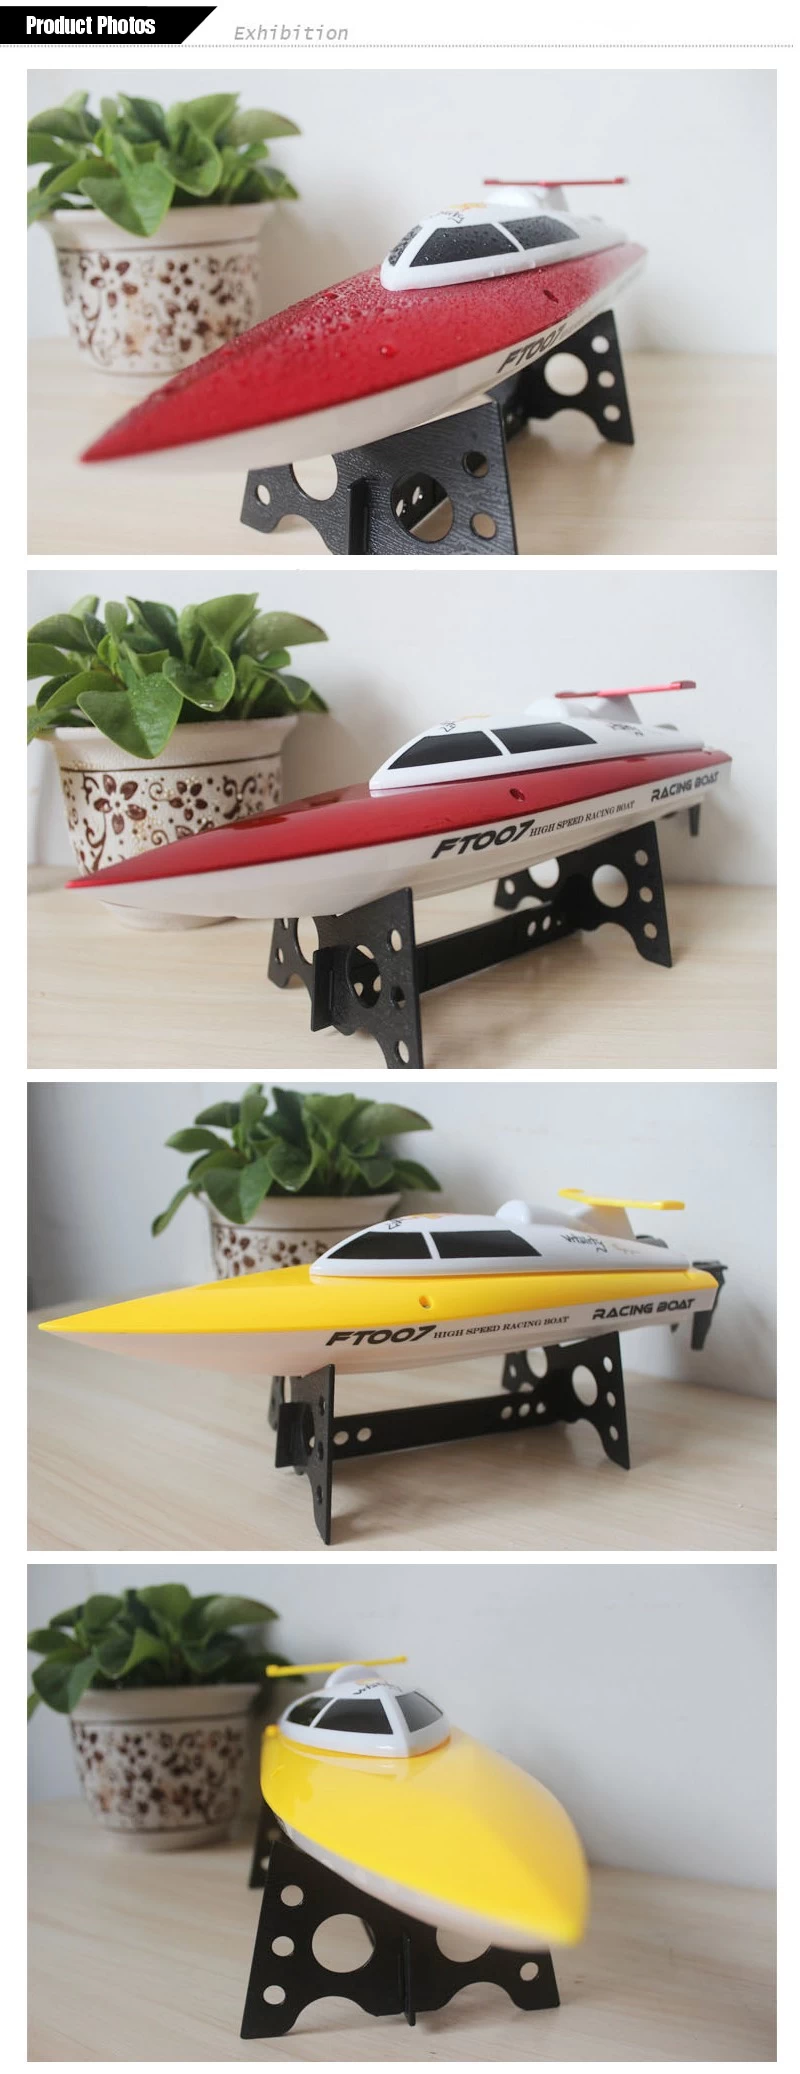 Racing boat,fast speed boat,rc boat